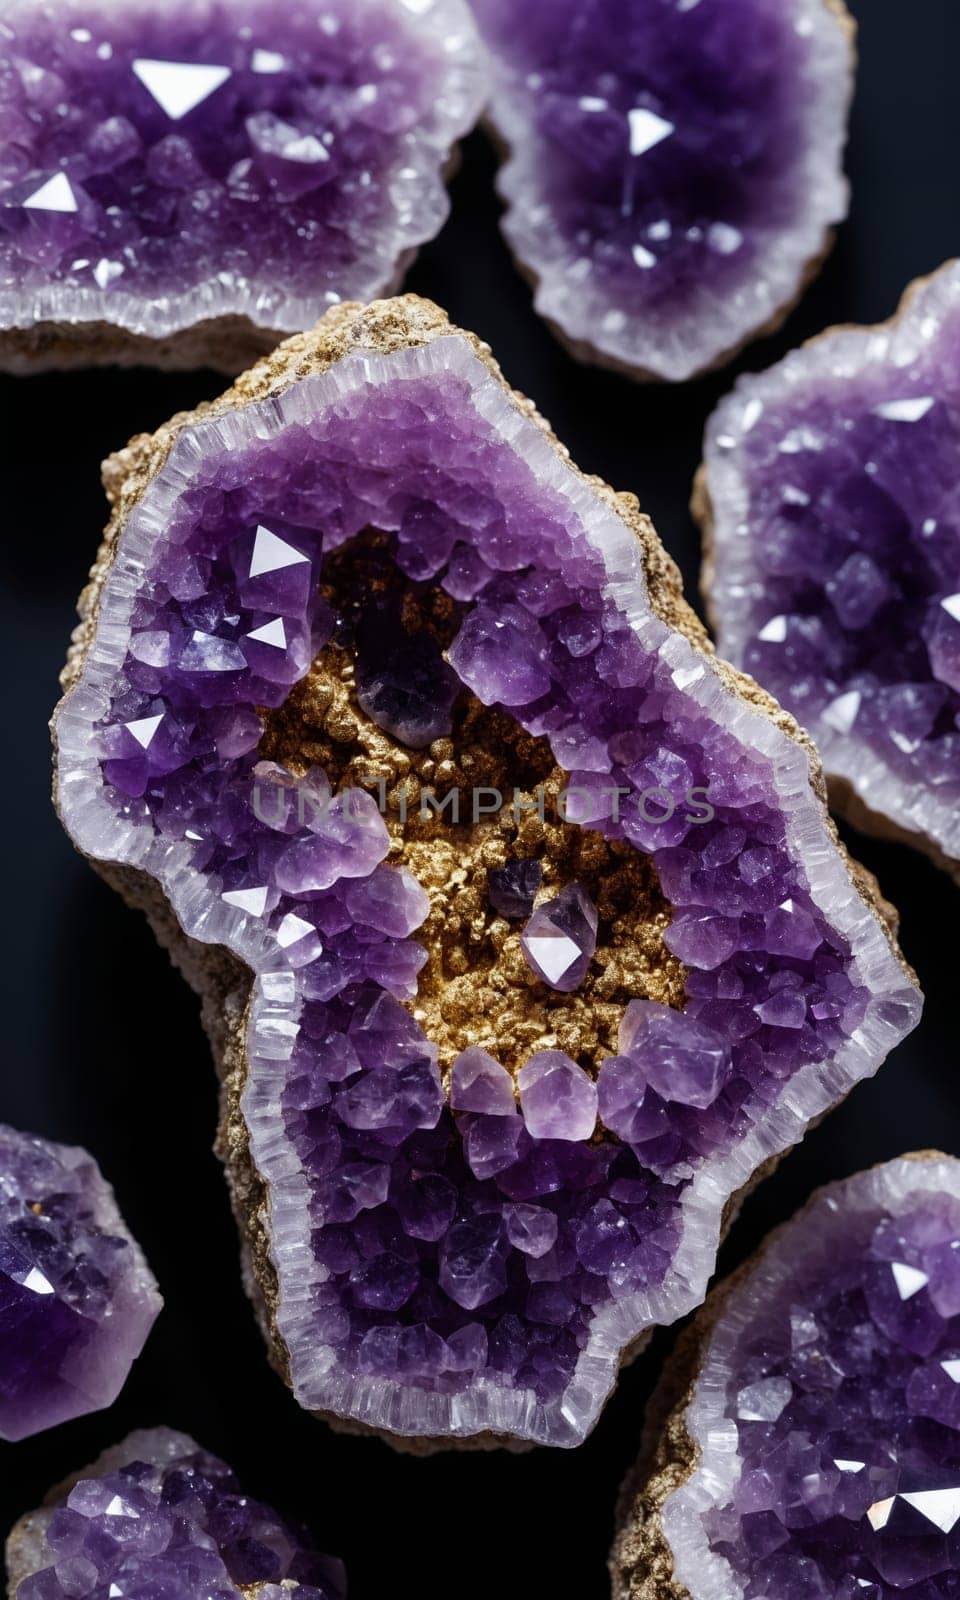 Amethyst on a black background. Macro shooting of natural jewels. by Andre1ns